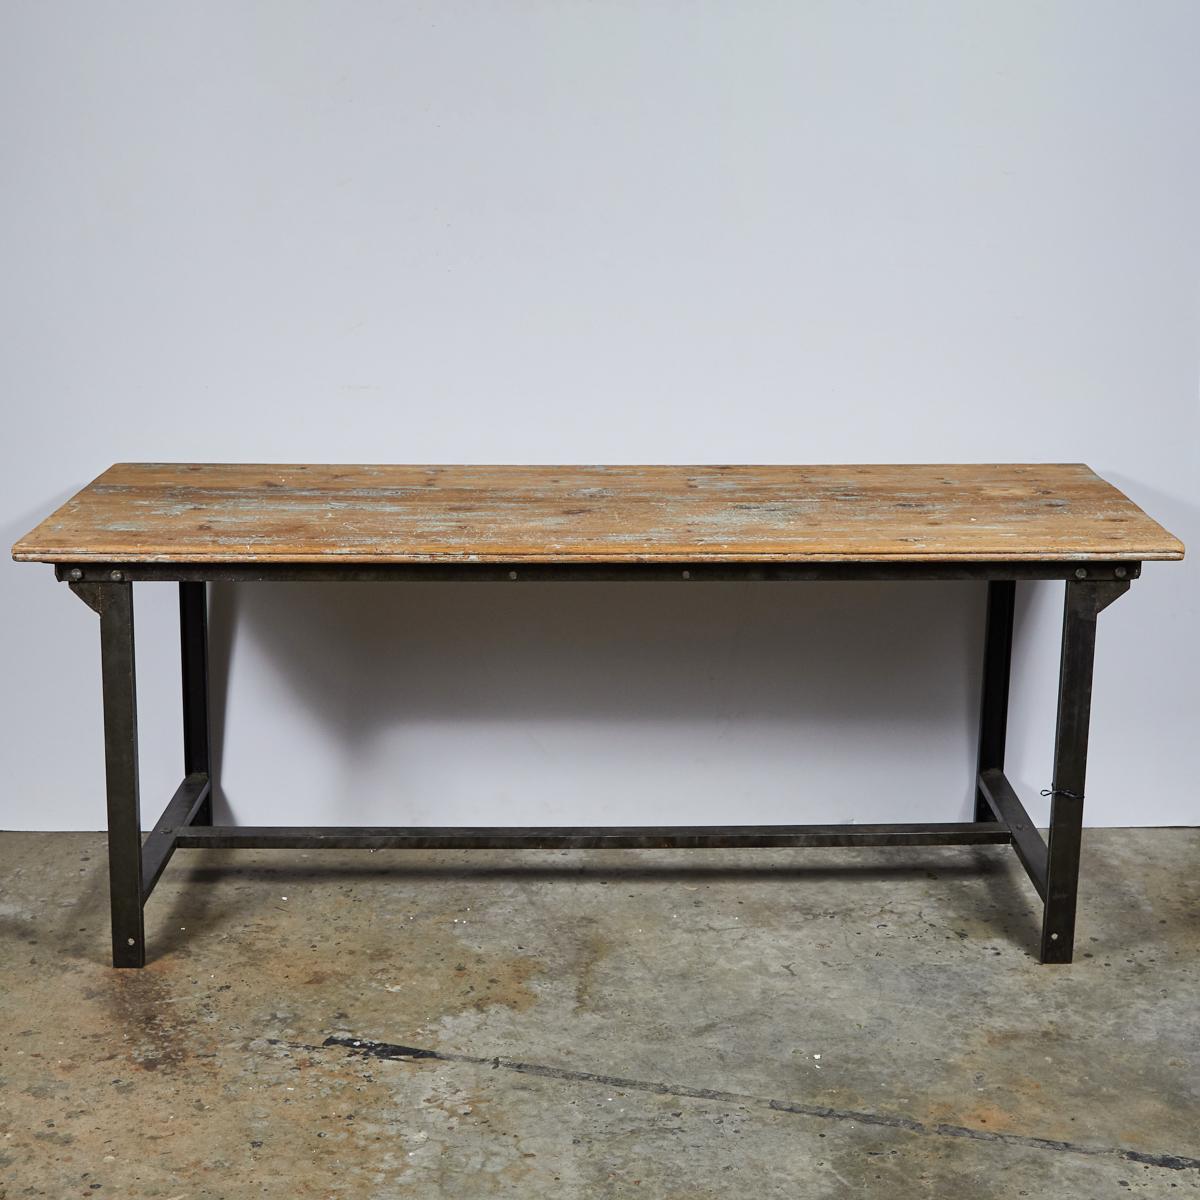 Early 20th-century French industrial table with blonde, exposed wood top and metal base. With its slim rectangular proportions and emphasis on raw materials, the piece has light but sturdy feel. 

France, circa 1900

Dimensions: 75W x 28.5D x 29.5H